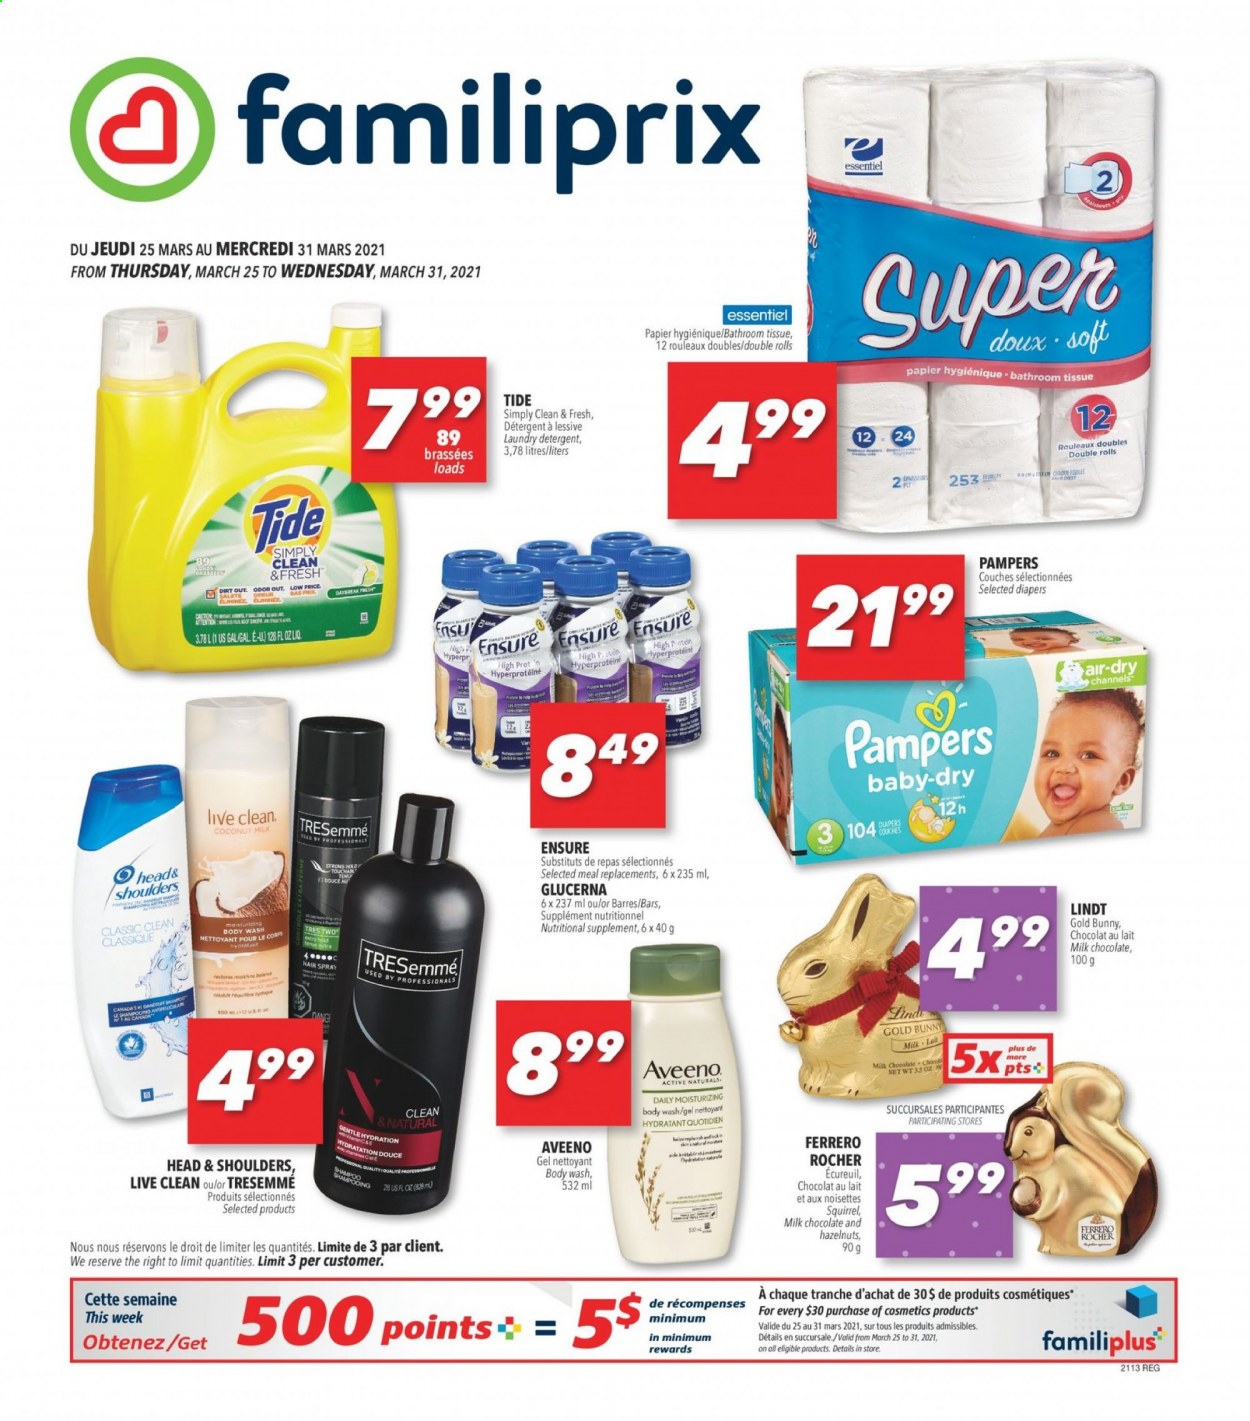 thumbnail - Familiprix Flyer - March 25, 2021 - March 31, 2021 - Sales products - milk chocolate, Mars, coconut milk, nappies, Aveeno, bath tissue, Tide, laundry detergent, body wash, TRESemmé, Glucerna, nutritional supplement, Head & Shoulders, Pampers. Page 1.